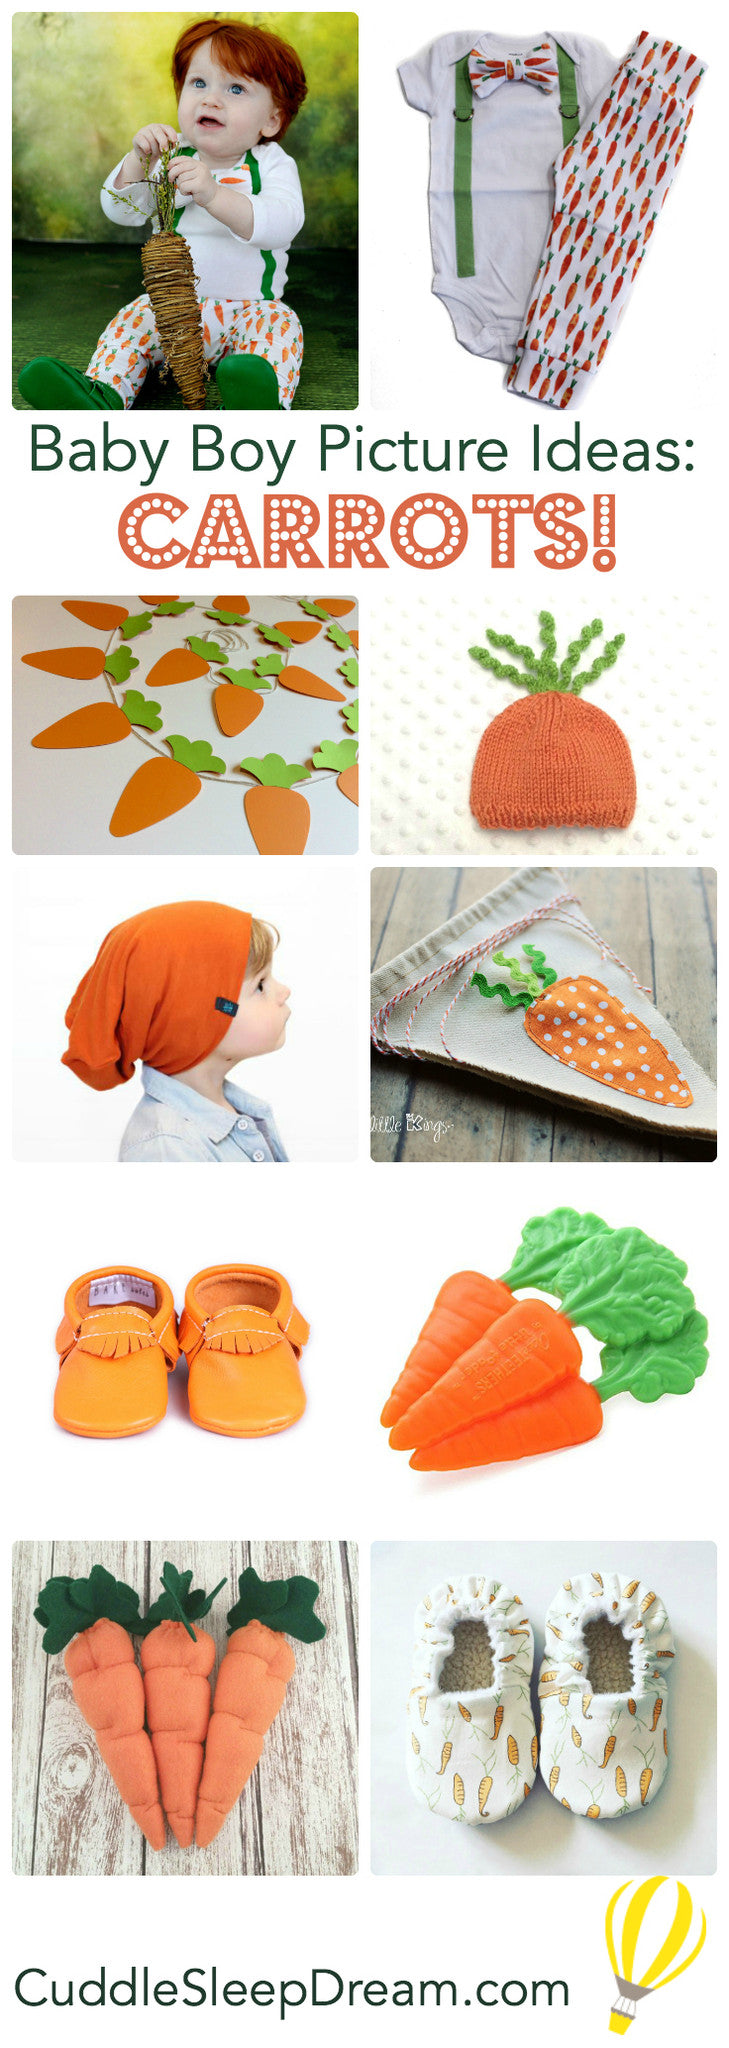 baby boy easter picture ideas: carrots